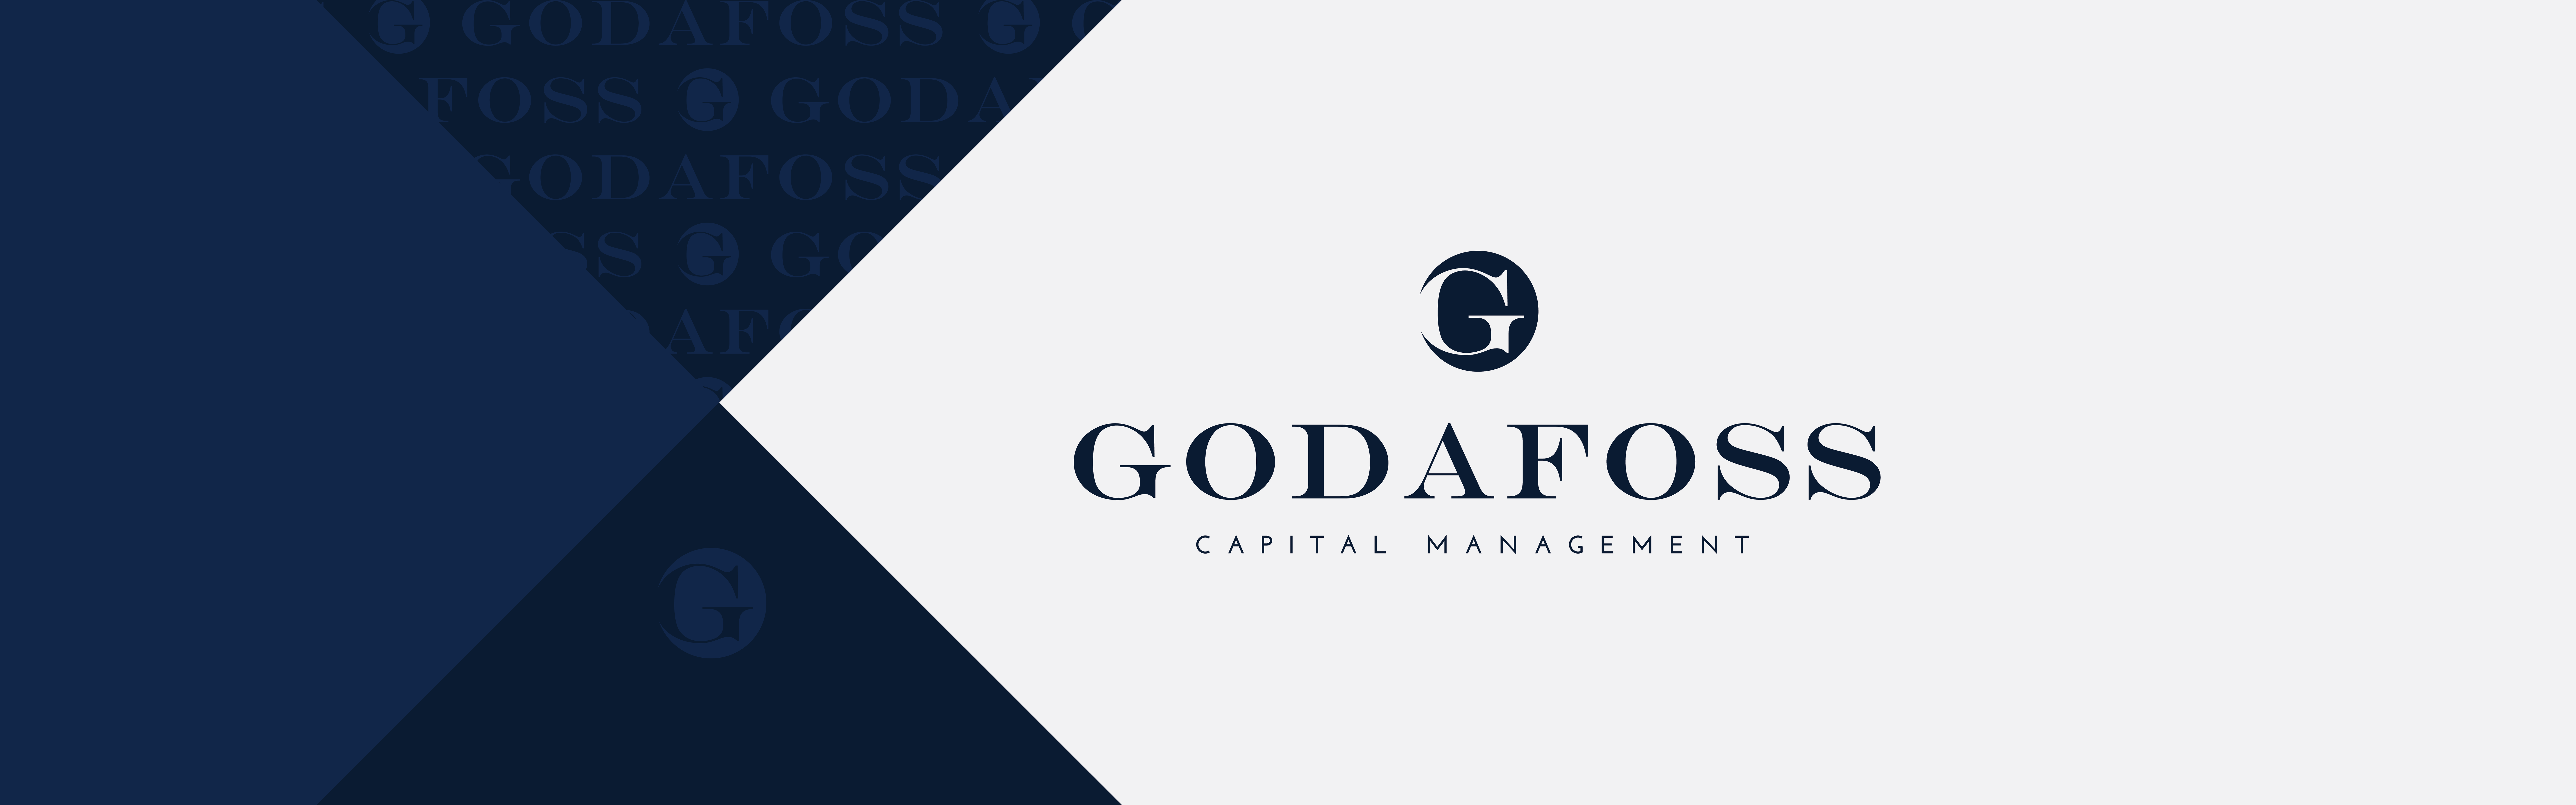 Corporate branding for Godafoss Capital Management featuring a logo with a letter "g" inside a circular motif, set against a geometric background with shades of dark and light blue.